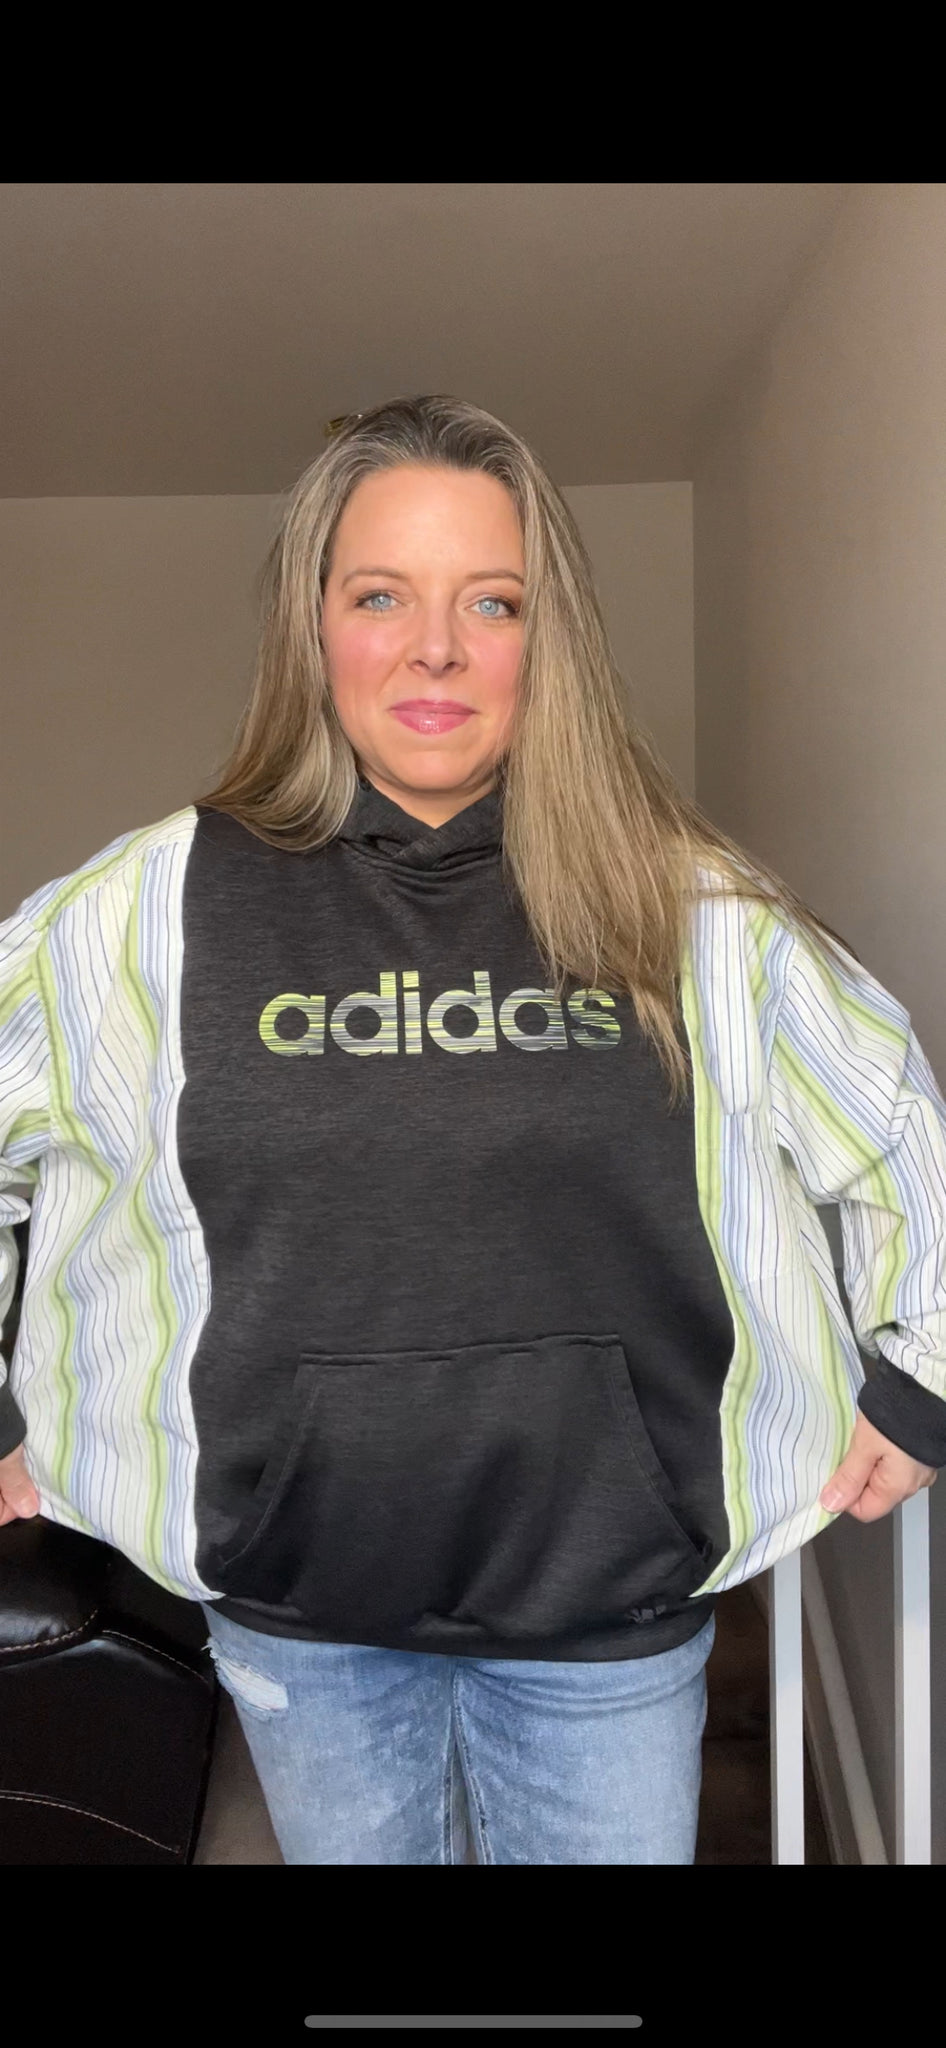 Upcycled Green Black Adidas – women’s L/XL – soft thick sweatshirt with thin cotton sleeves – bottom band and neck slightly tighter ￼